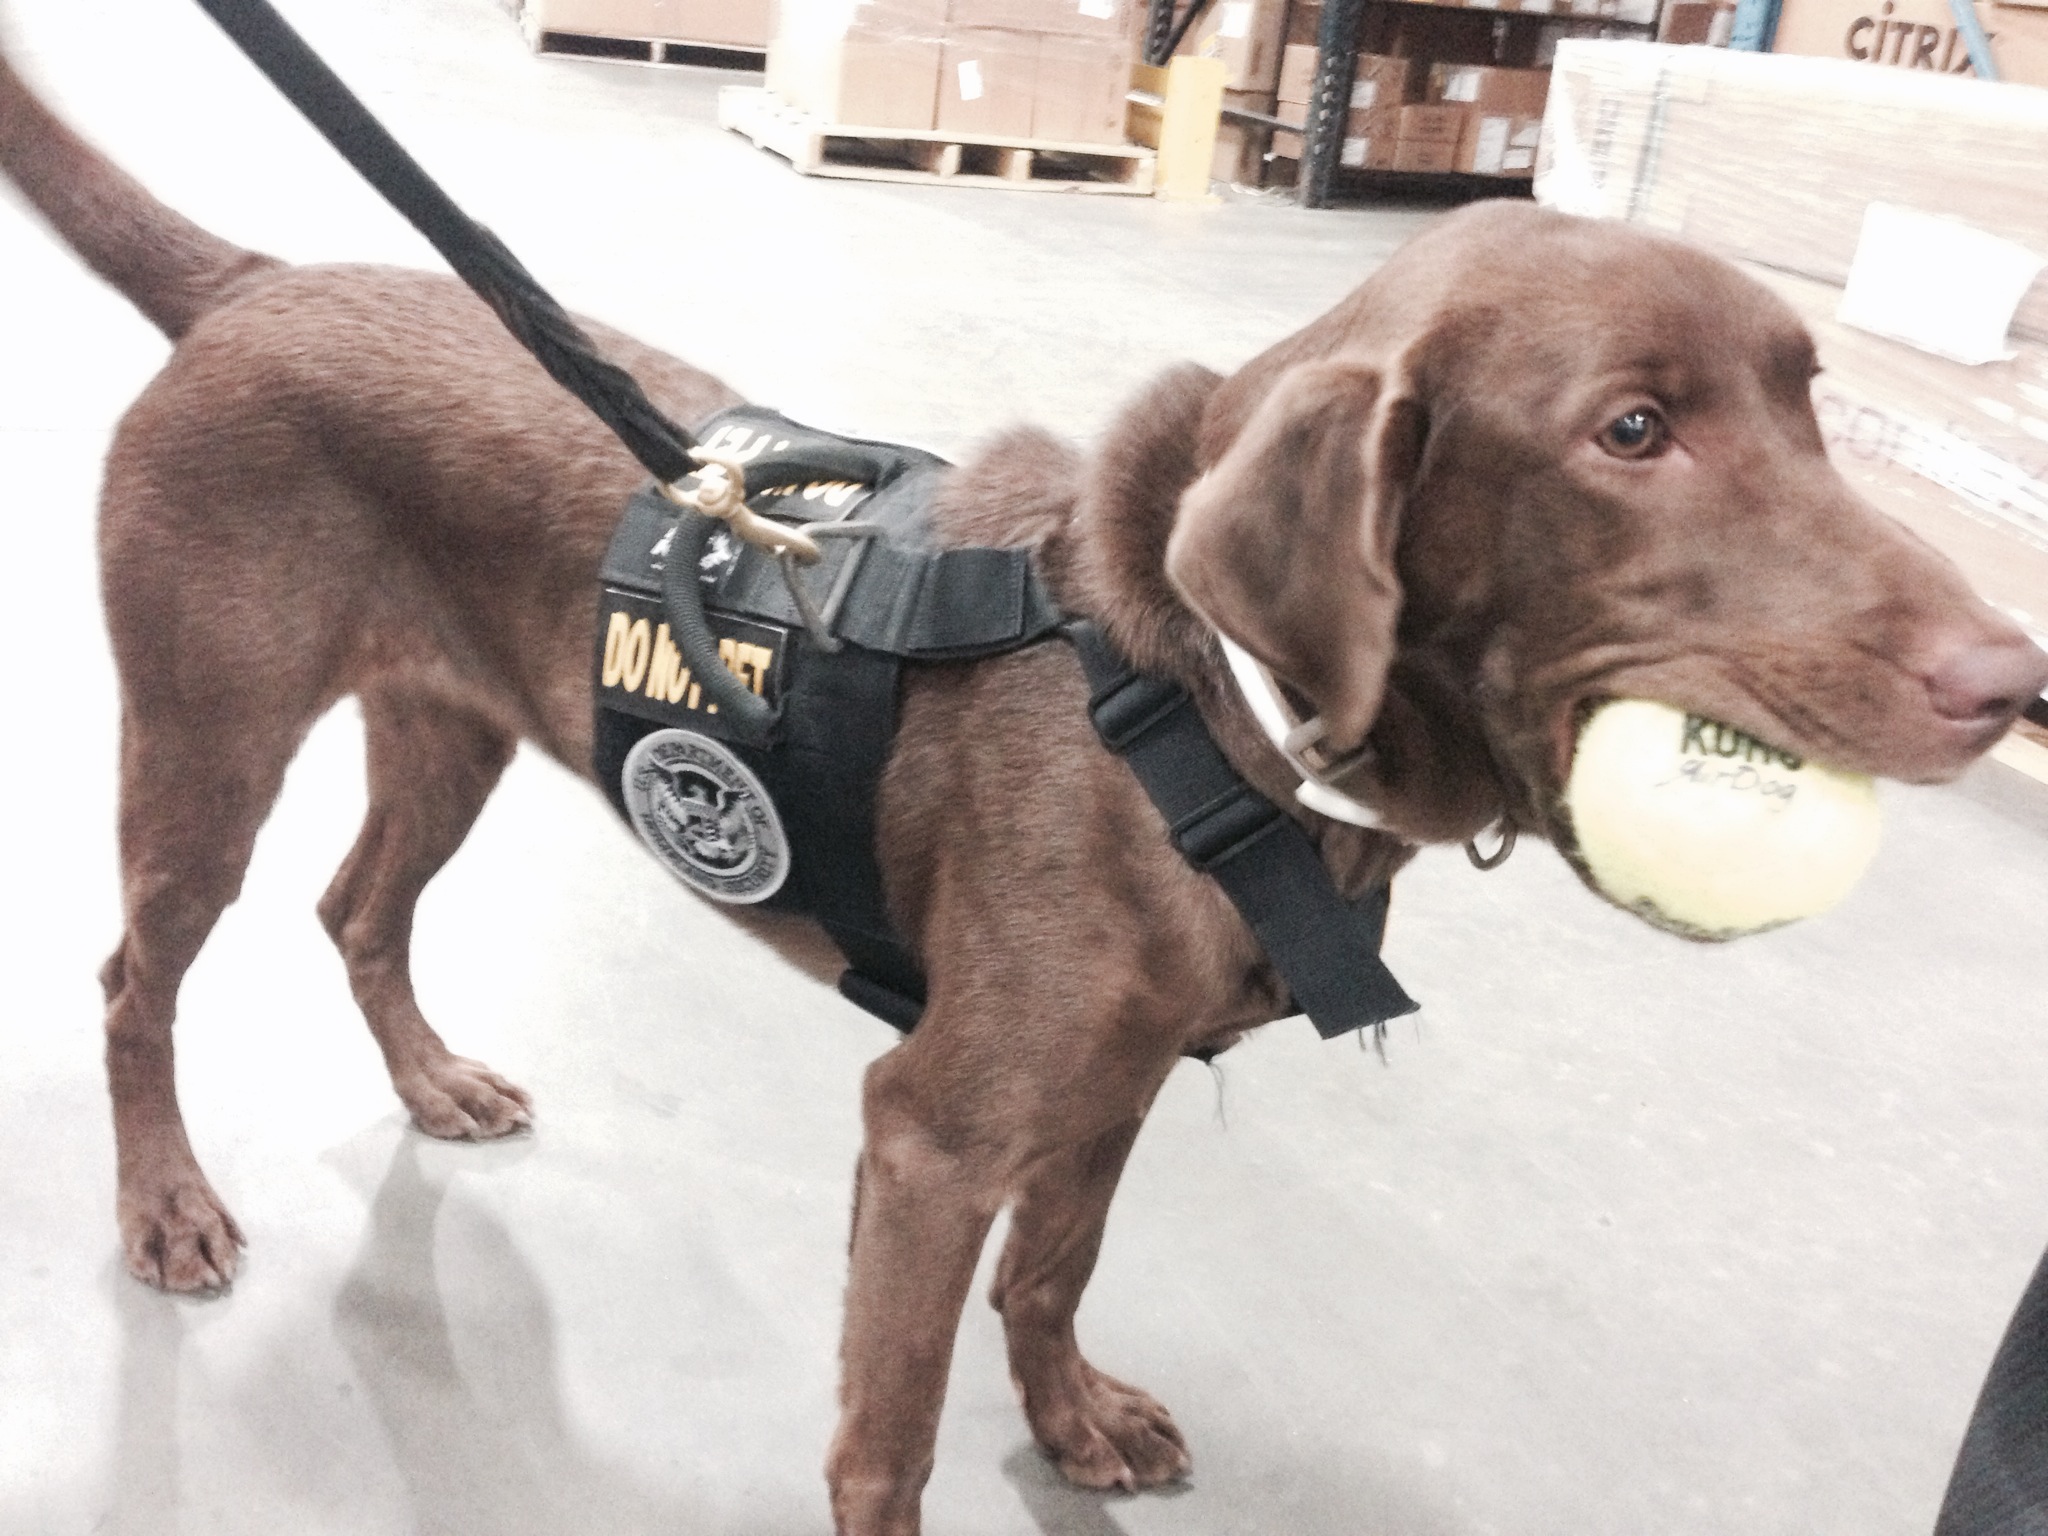 Dog team screens for explosives at Dulles International Airport (Photos)